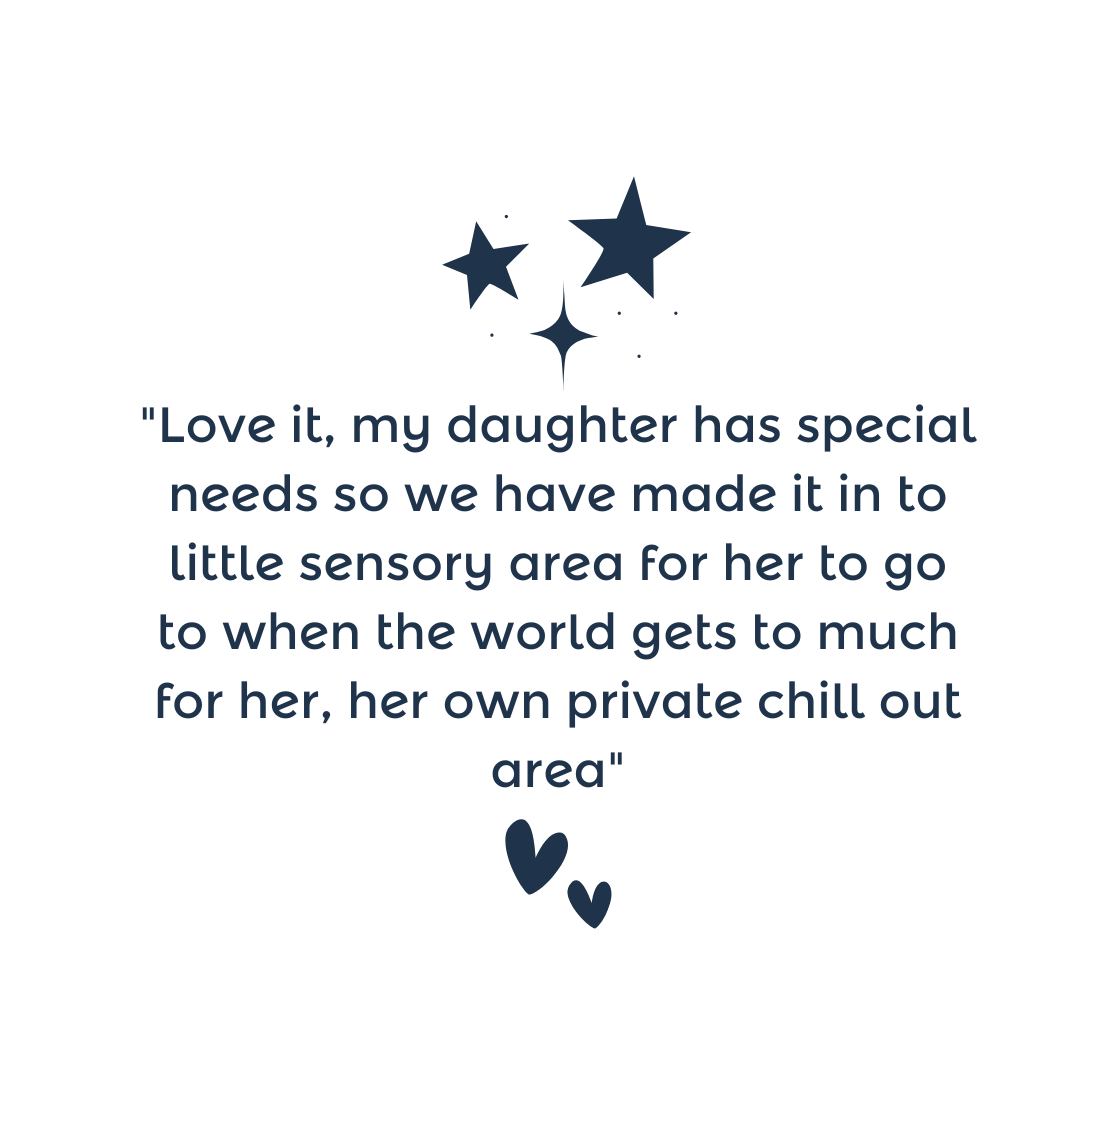 "Love it, my daughter has special needs so we have made it in to little sensory area for her to go to when the world gets to much for her, her own private chill out area"